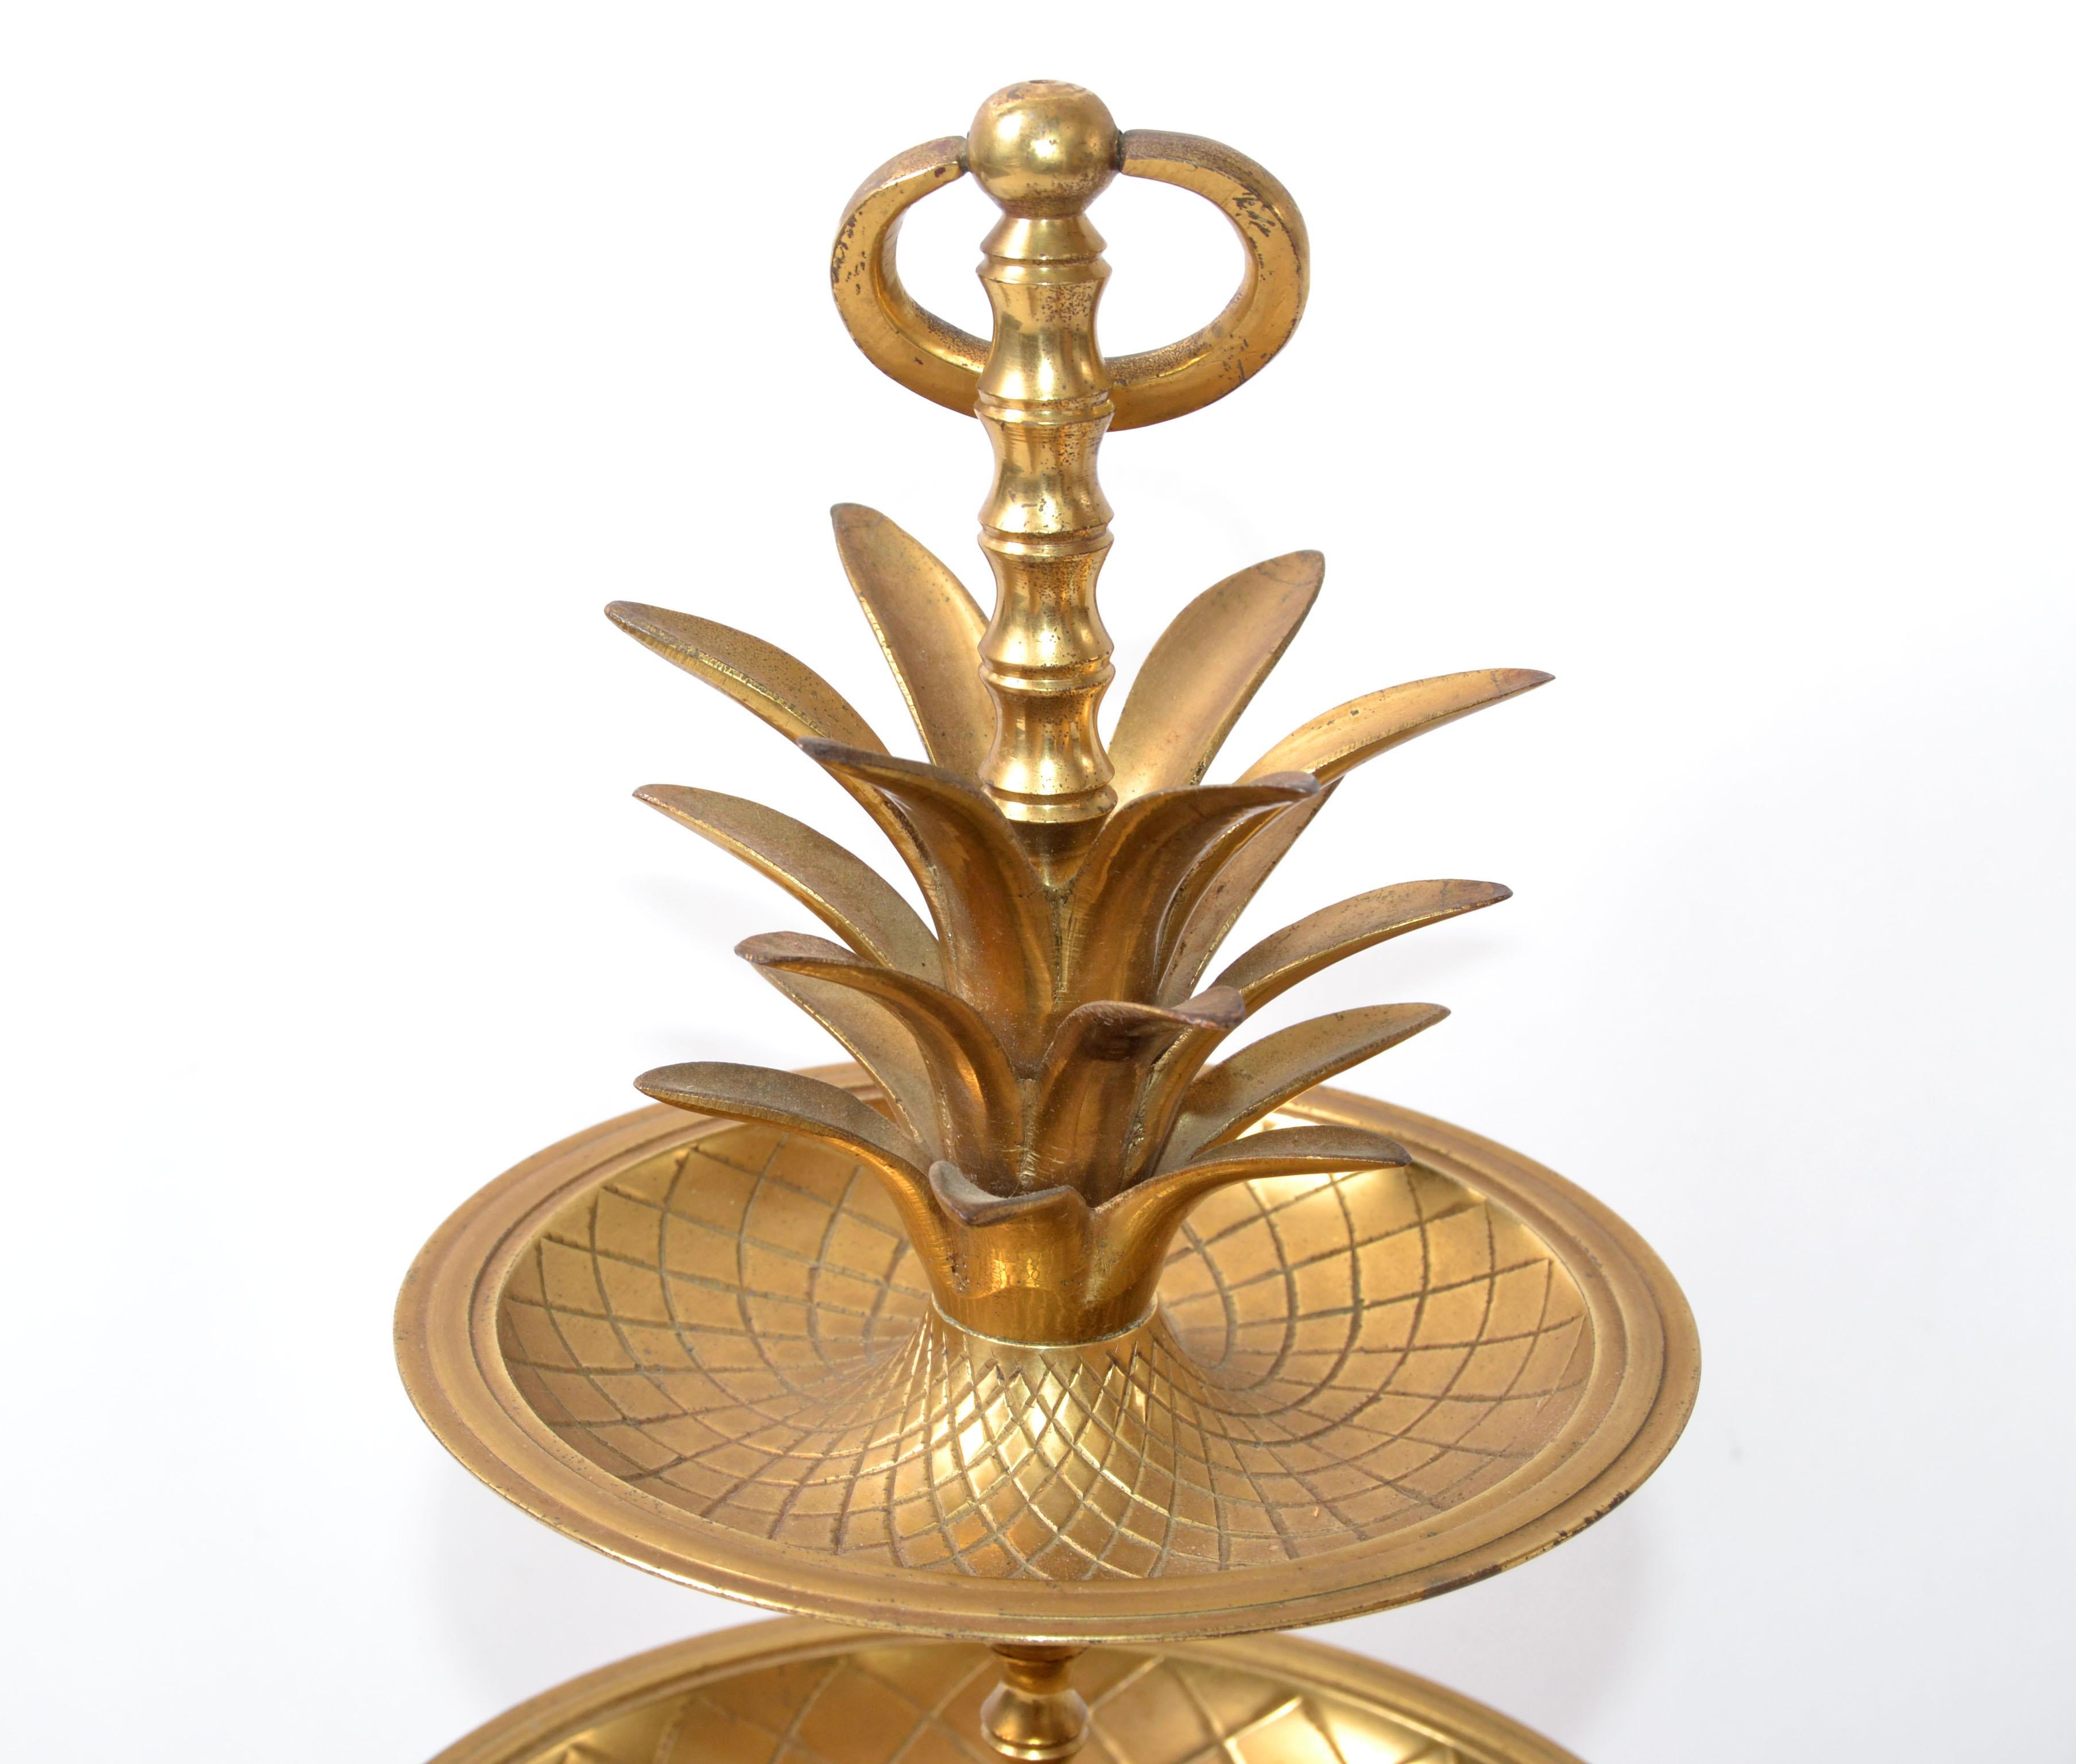 Hand-Crafted Brass Handcrafted 3-Tier Pineapple Nesting Serving Tray Stand